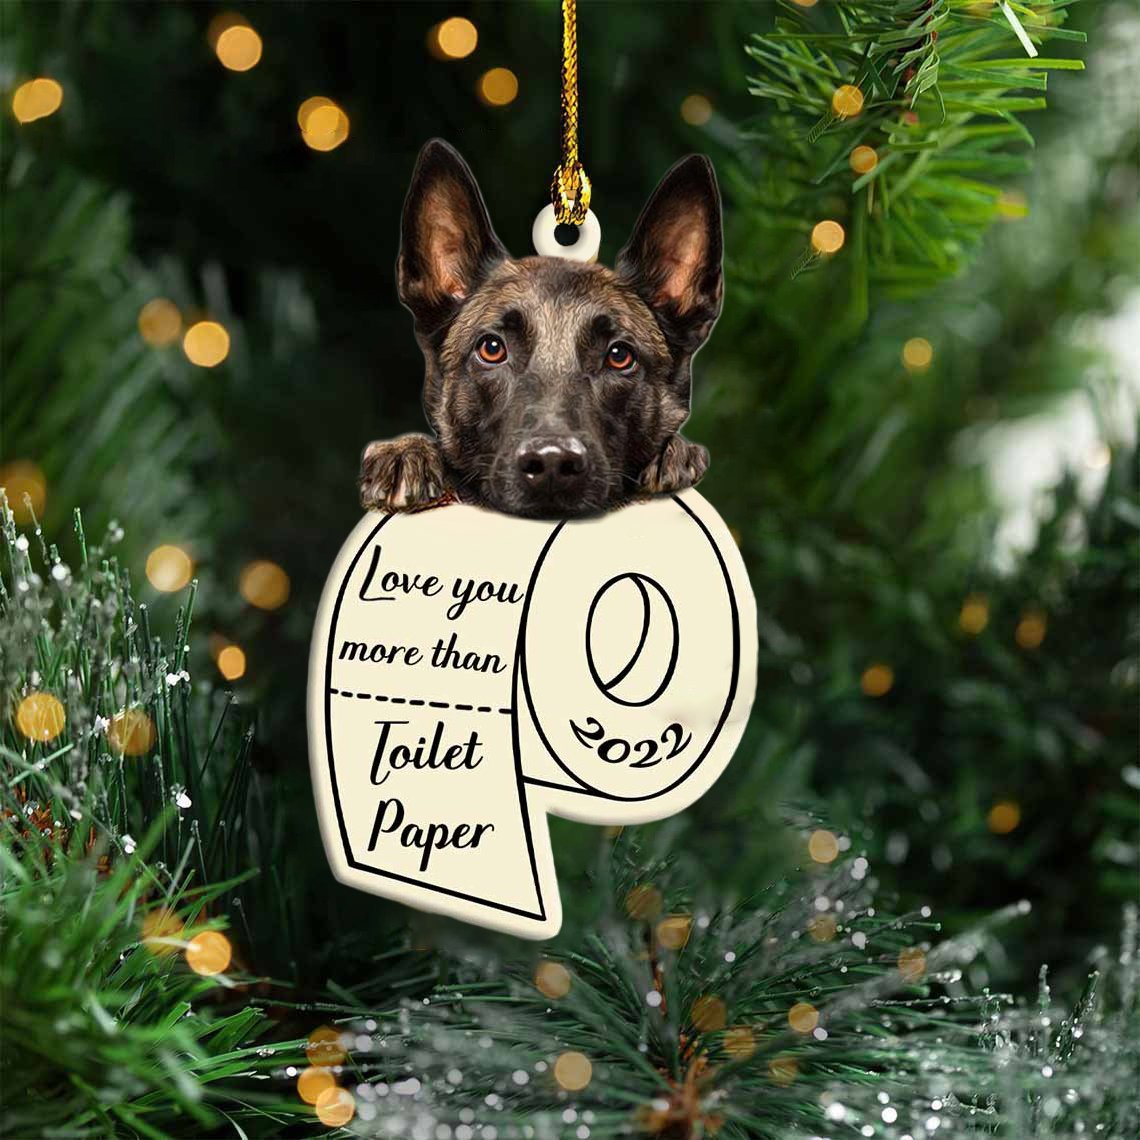 Malinois Love You More Than Toilet Paper 2022 Hanging Ornament